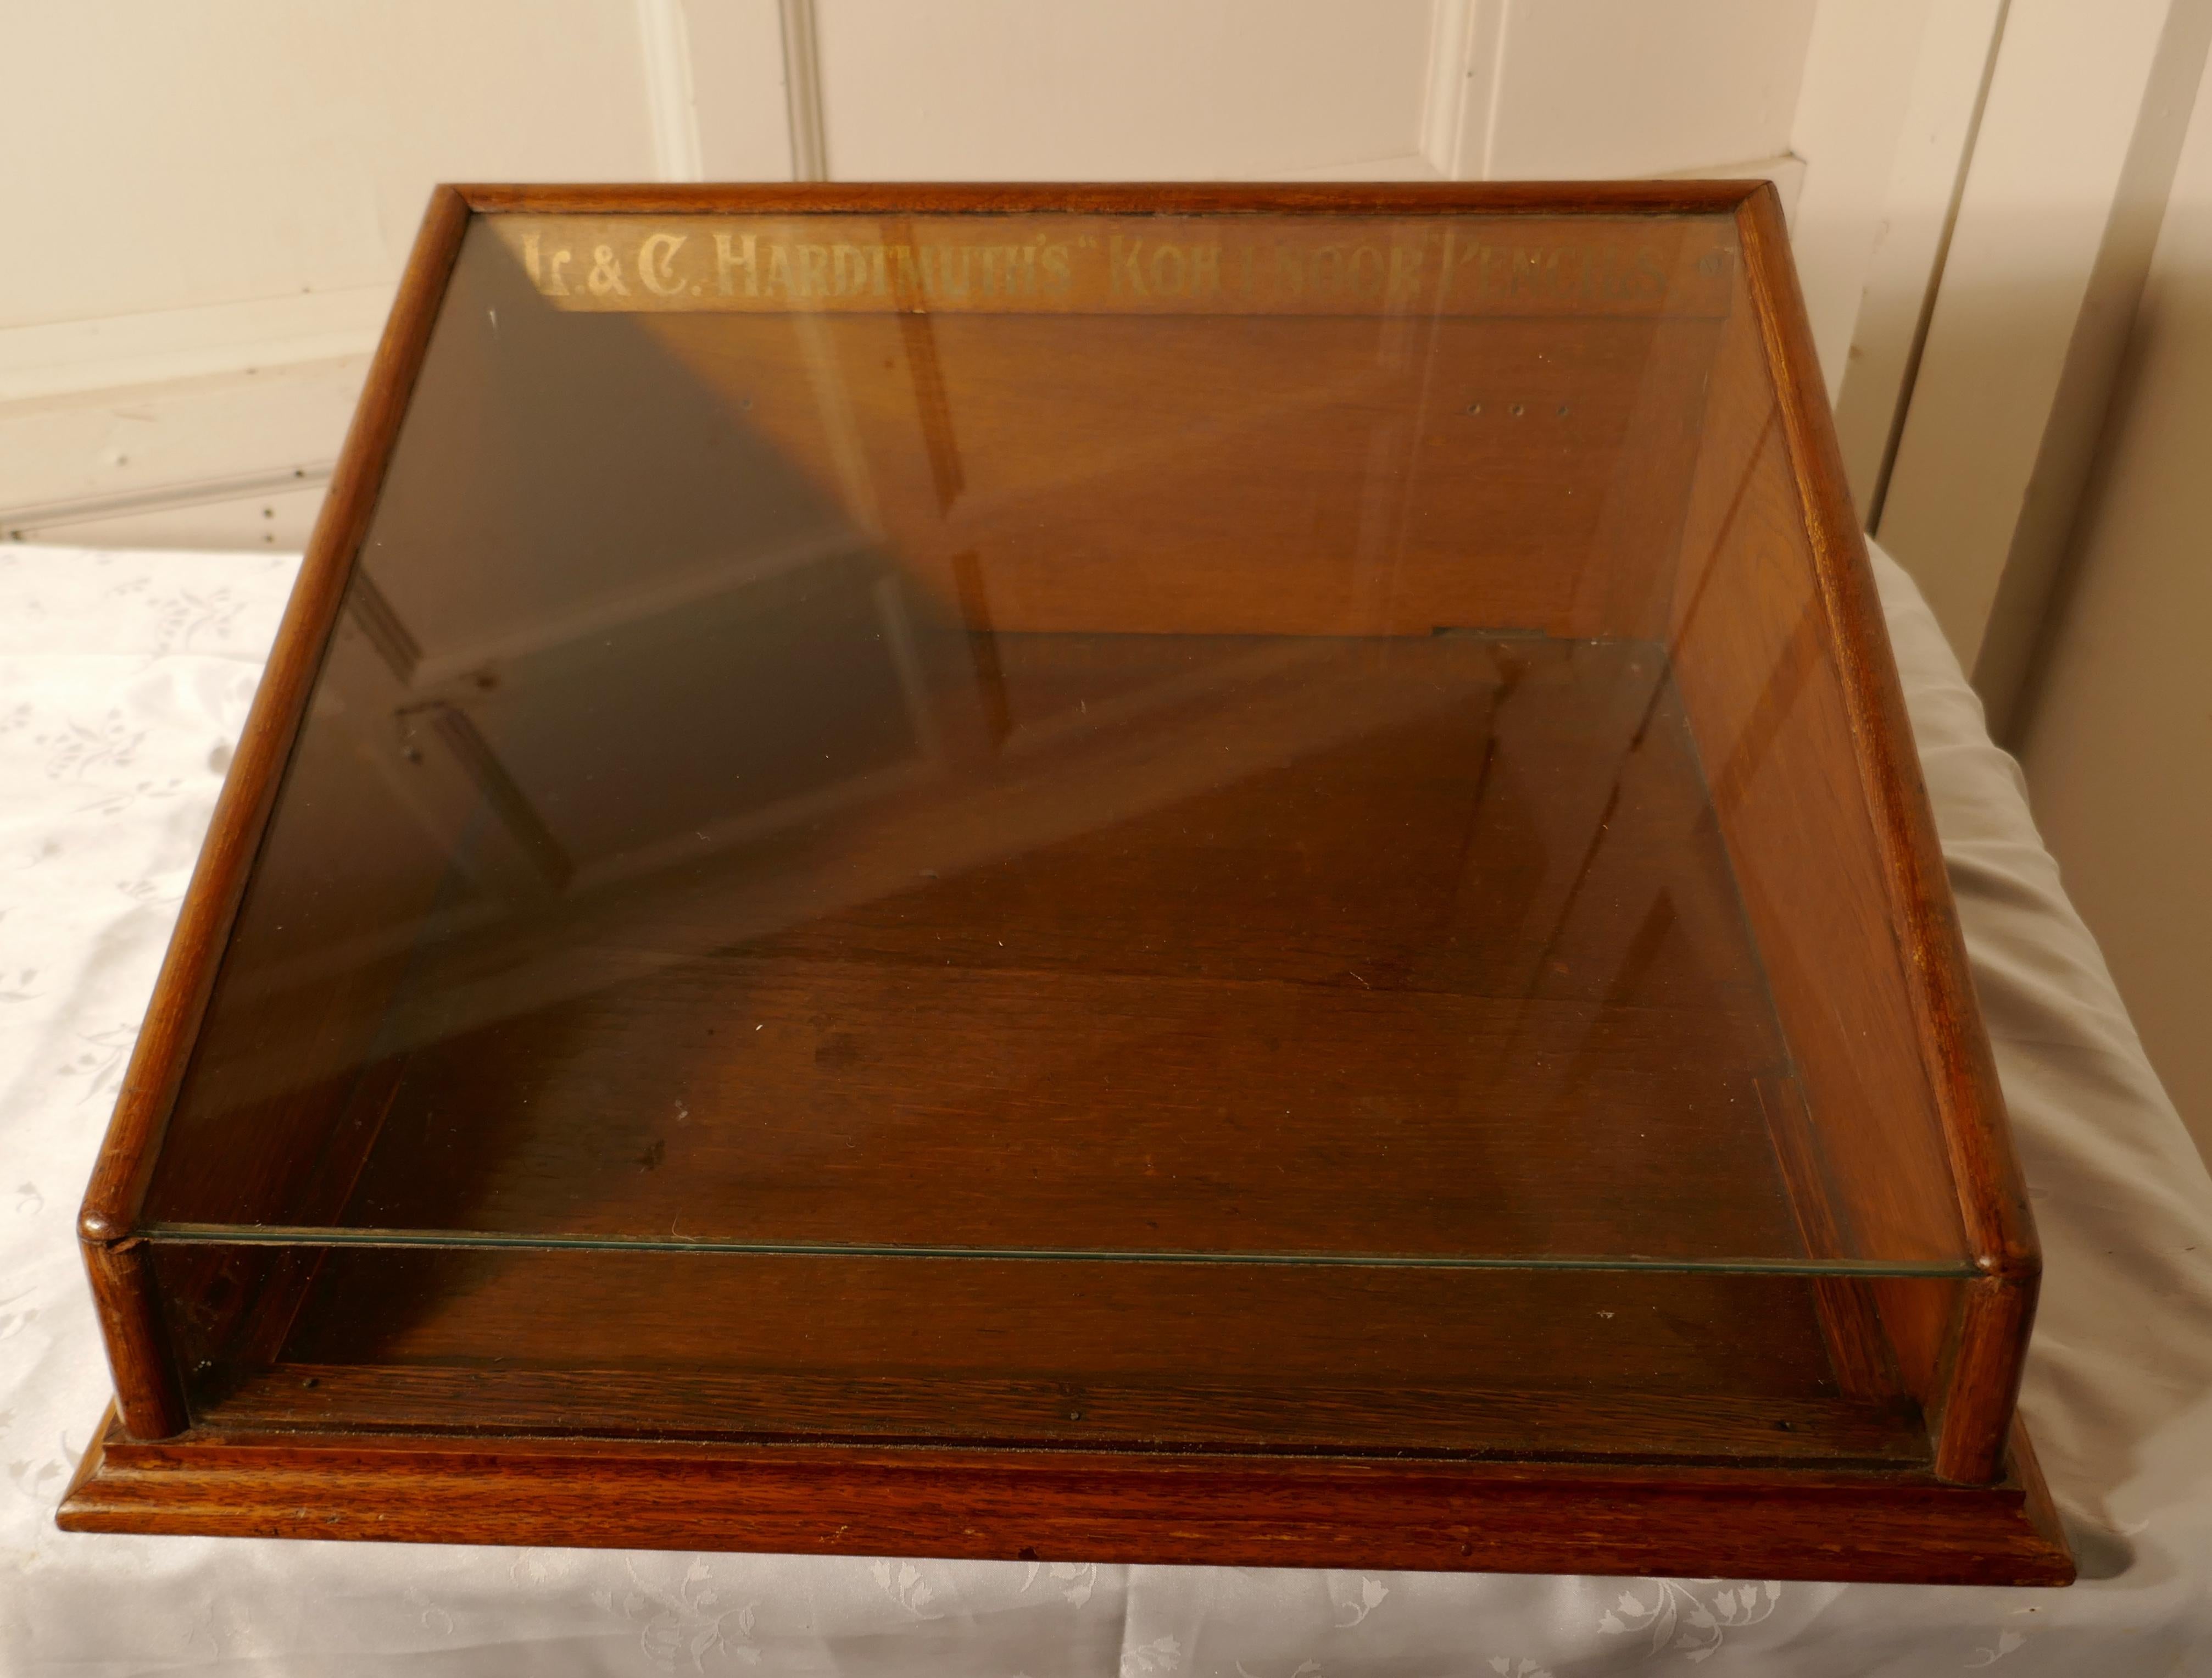 Counter top Display Cabinet for L & C HARDMUTH’S “KOH-I NOOR” Pencils

A Great little display cabinet made in Golden Oak dating back to the end of the 19th Century, the cabinet has glass sloping top, it opens at the back and had a pink velvet